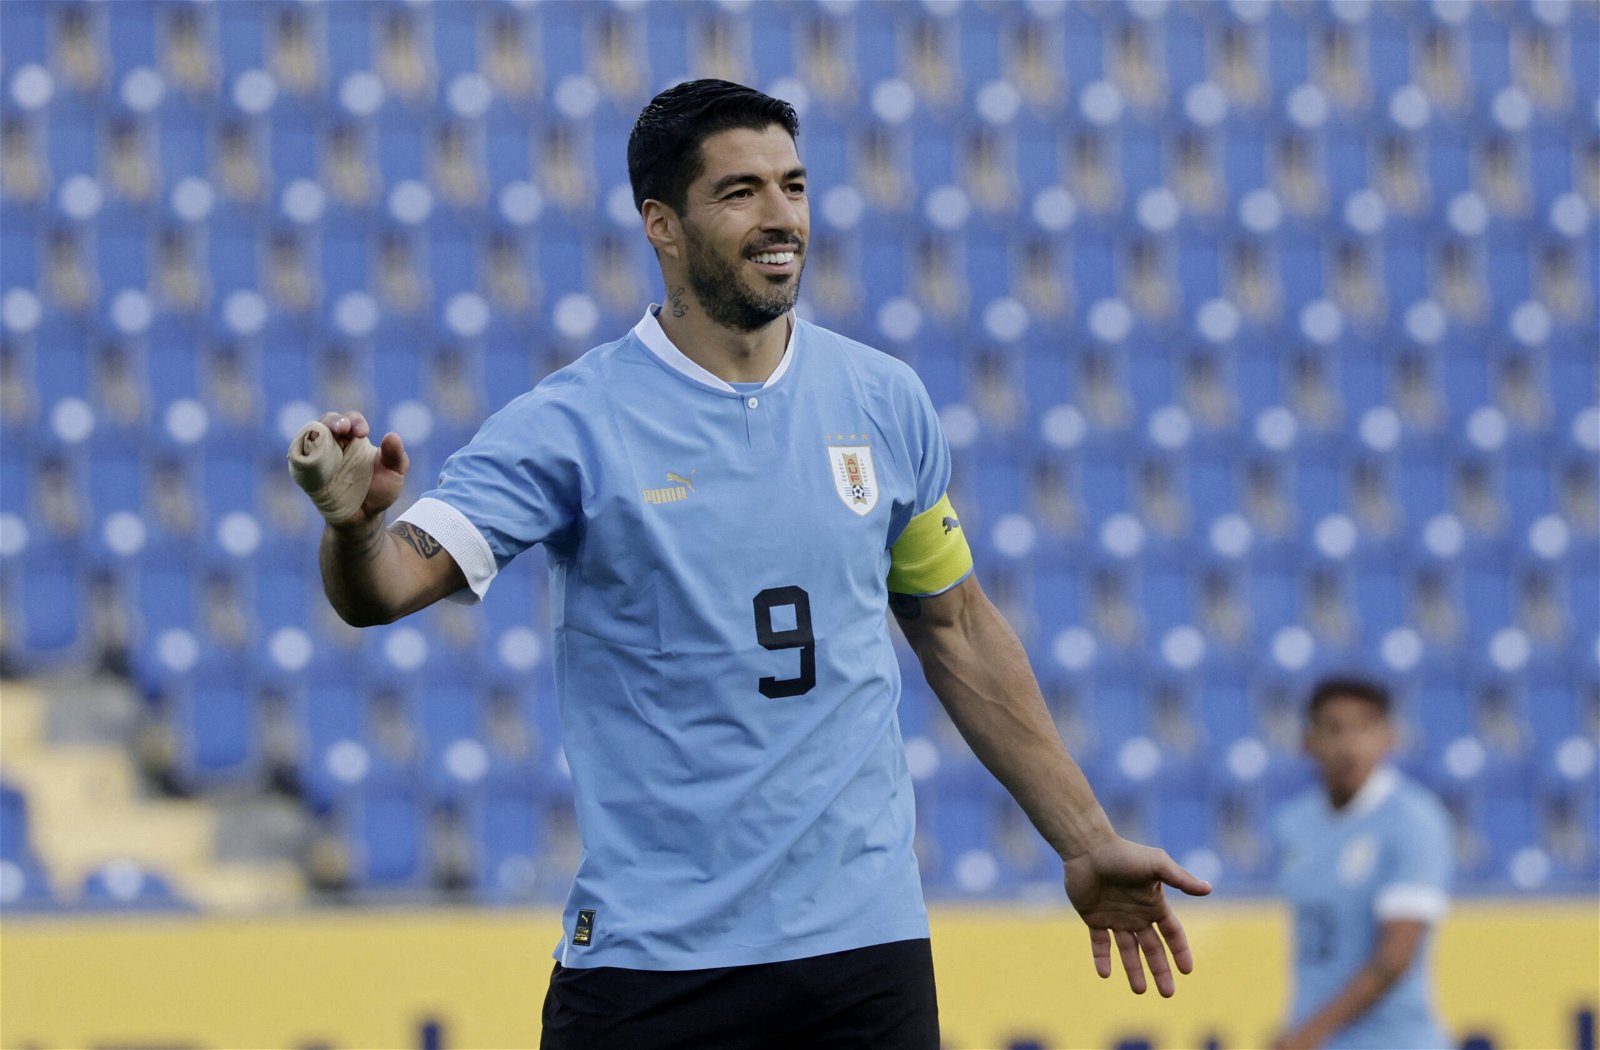 Who scores the most goals for Uruguay in World Cup